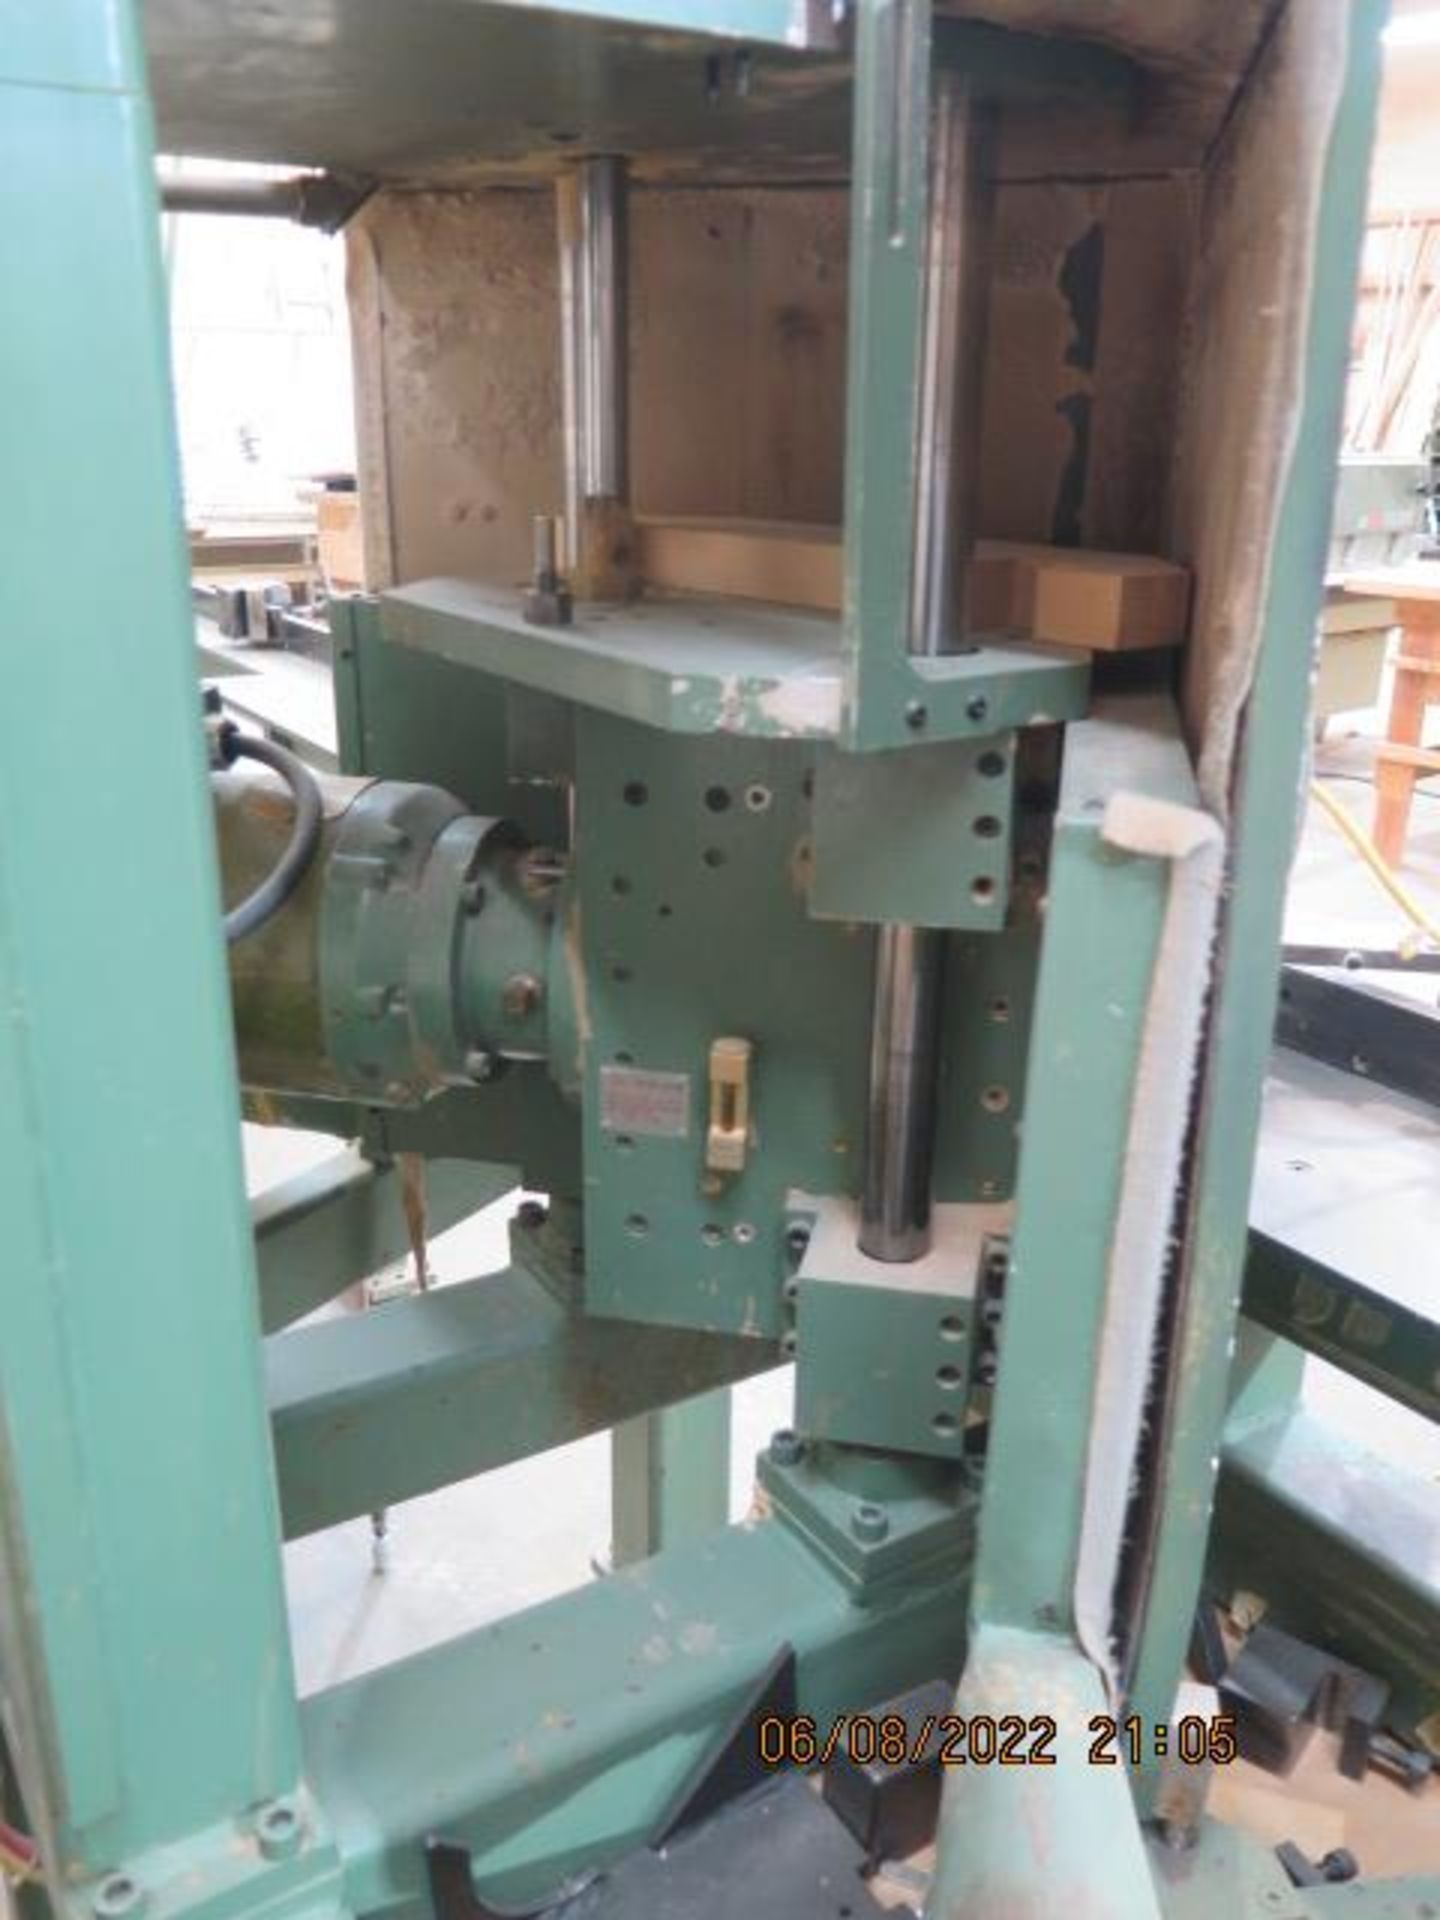 Cimmco DM100 Miter-Cut Saw s/n 8001 w/ Pneumatic Clamping and Feed, Fence System, SOLD AS IS - Image 6 of 10